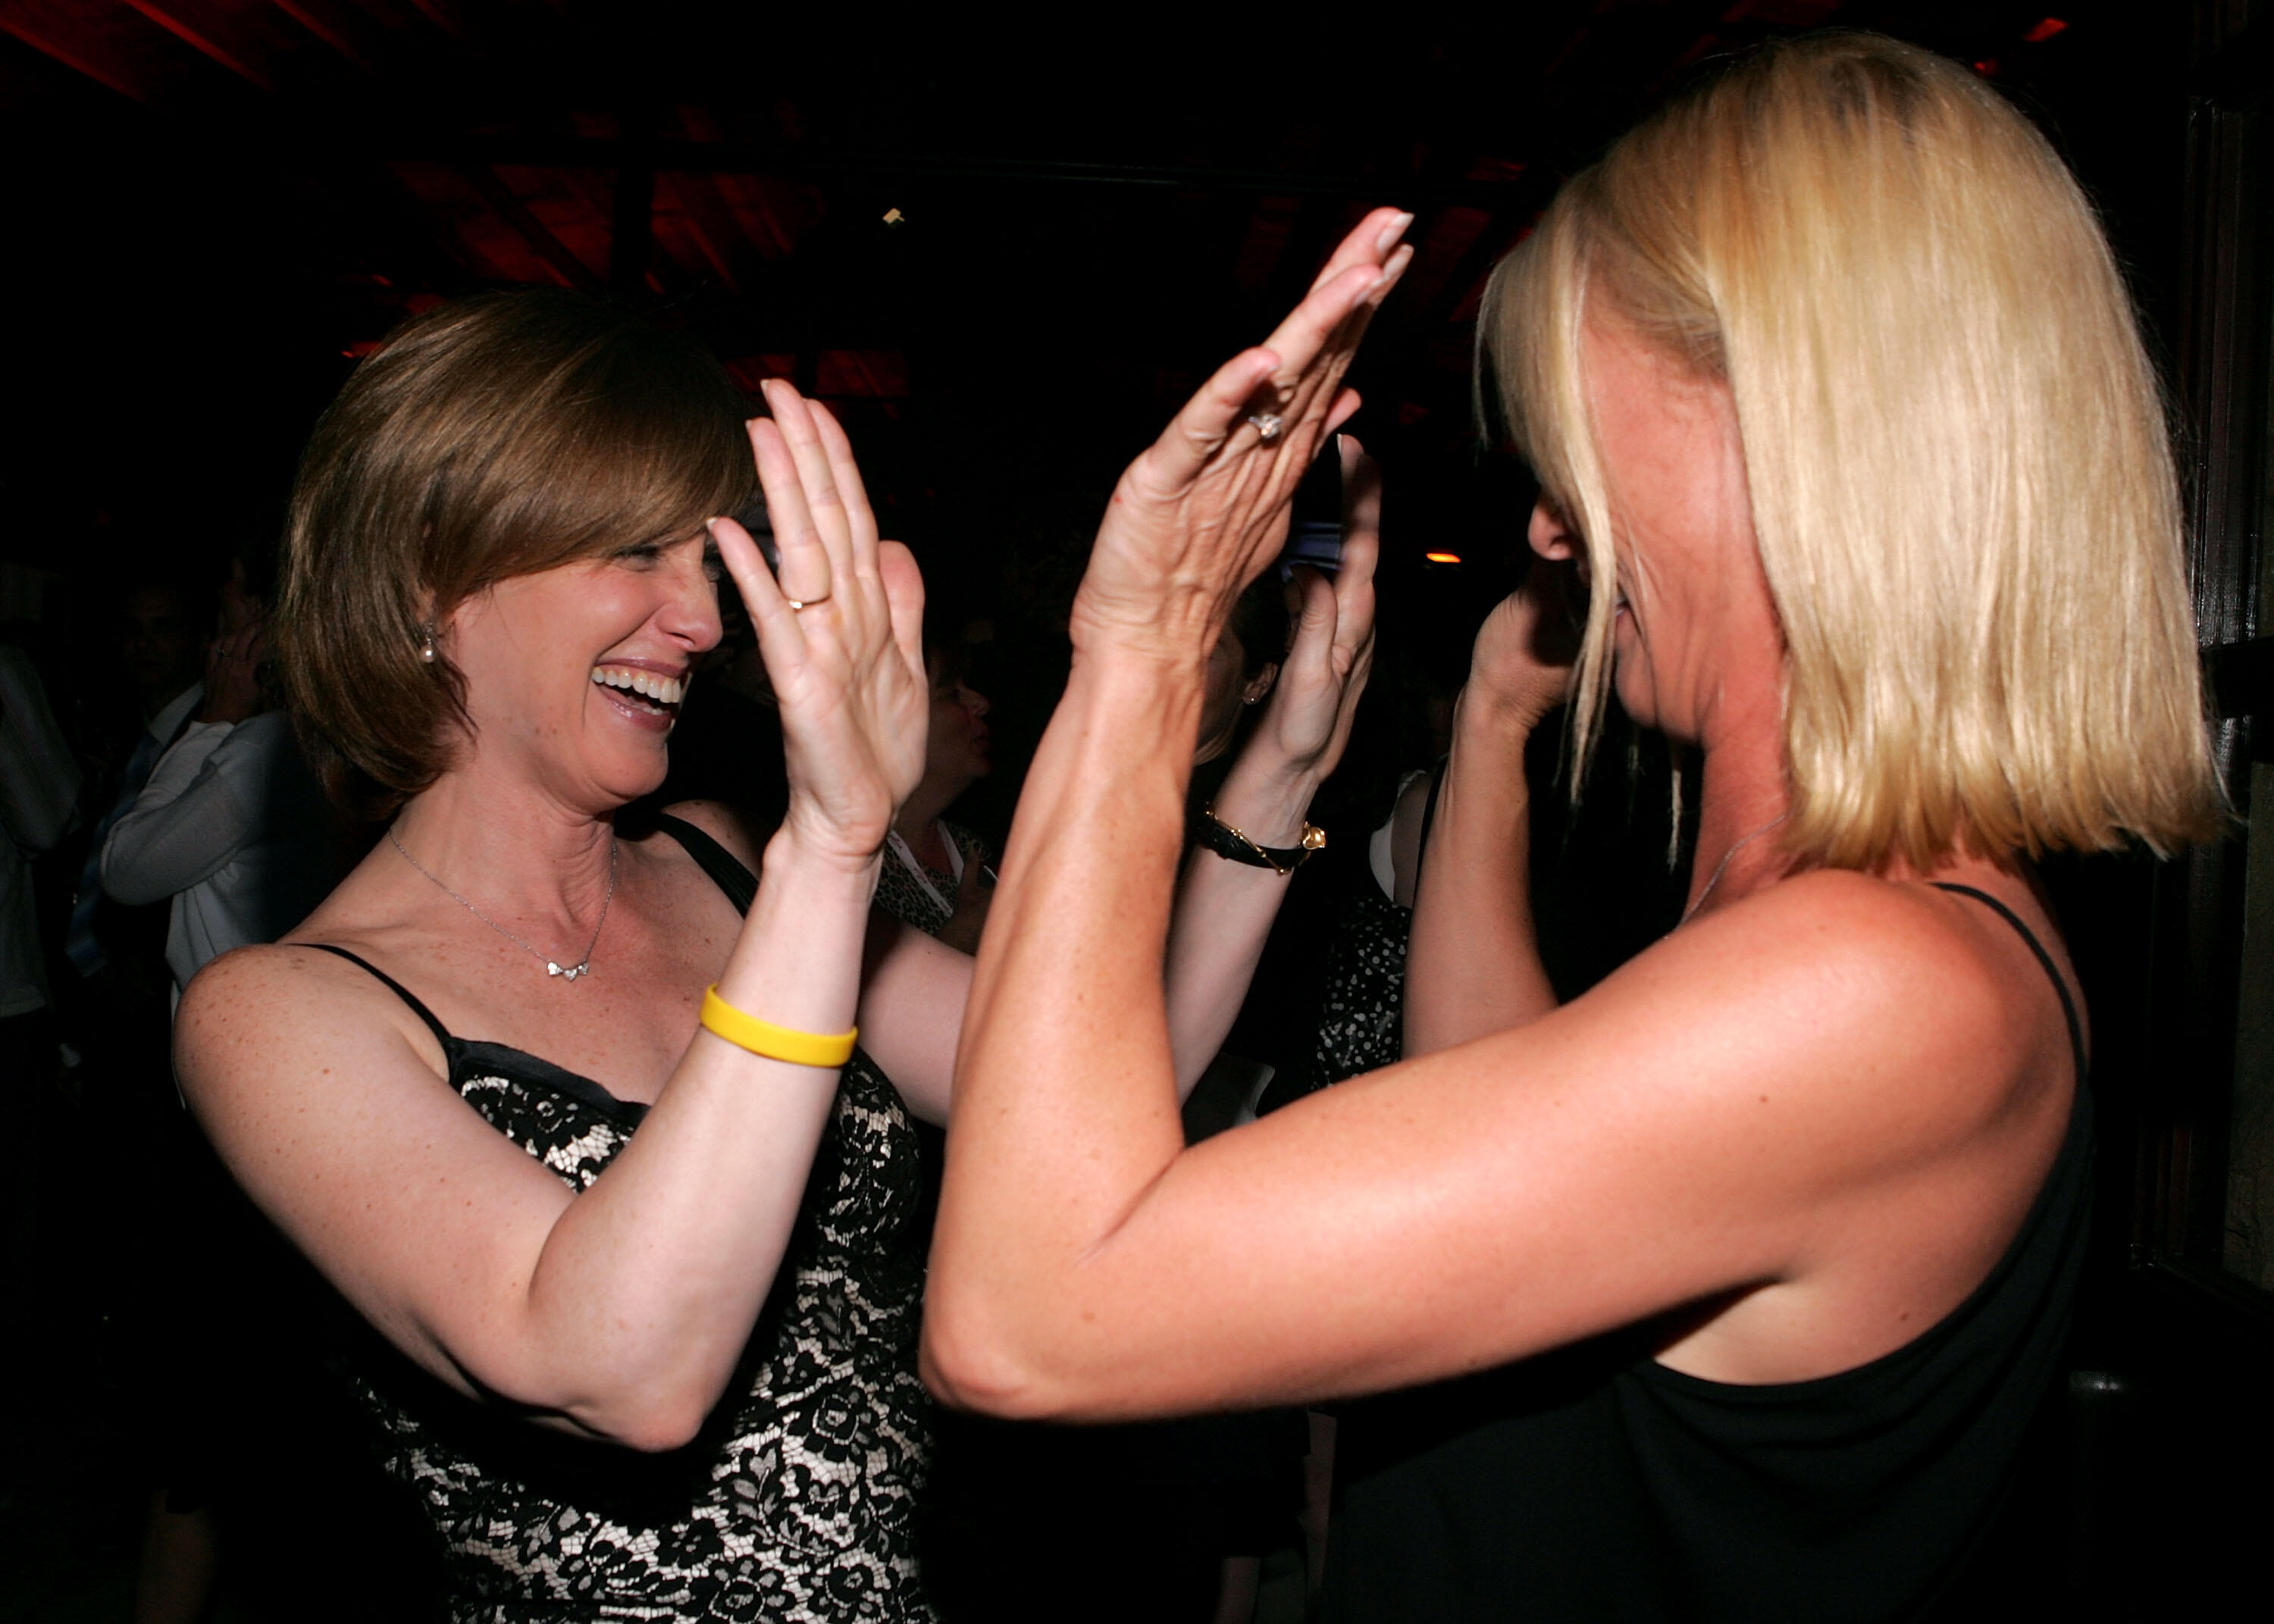 WEST HOLLYWOOD, CA - JULY 27:  Co-Chairman, Disney Media Networks, President, Disney-ABC Television Group Anne Sweeney and actress Nicollette Sheridan high-five inside at the ABC TCA party at the Abby on July 27, 2005 in West Hollywood, California.  (Phot